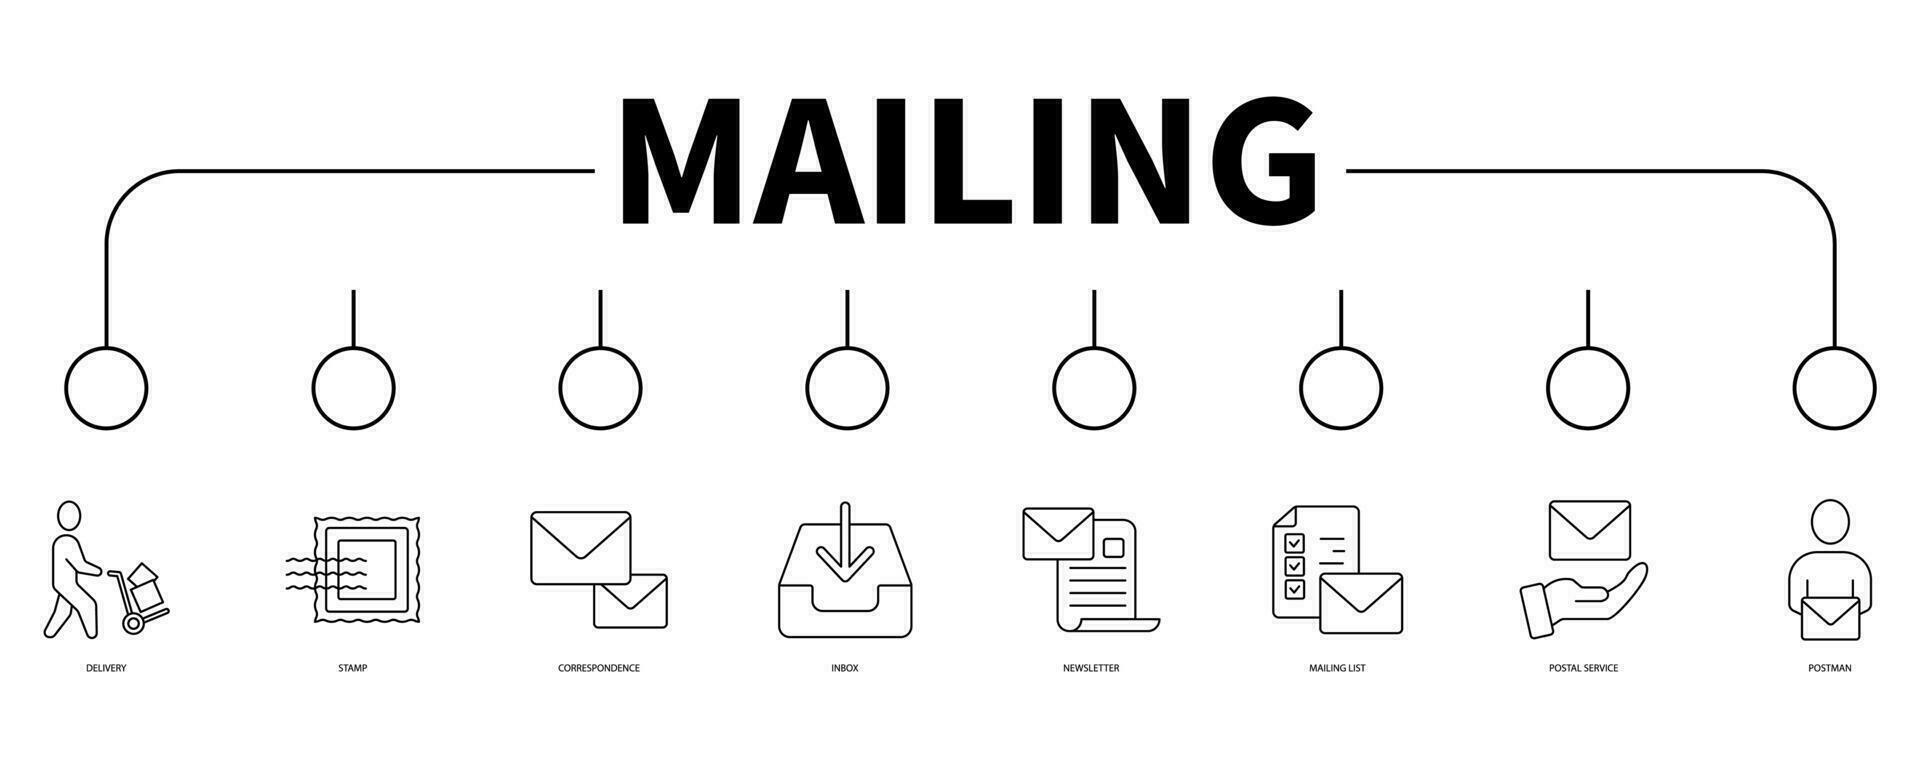 Mailing banner web icon vector illustration concept